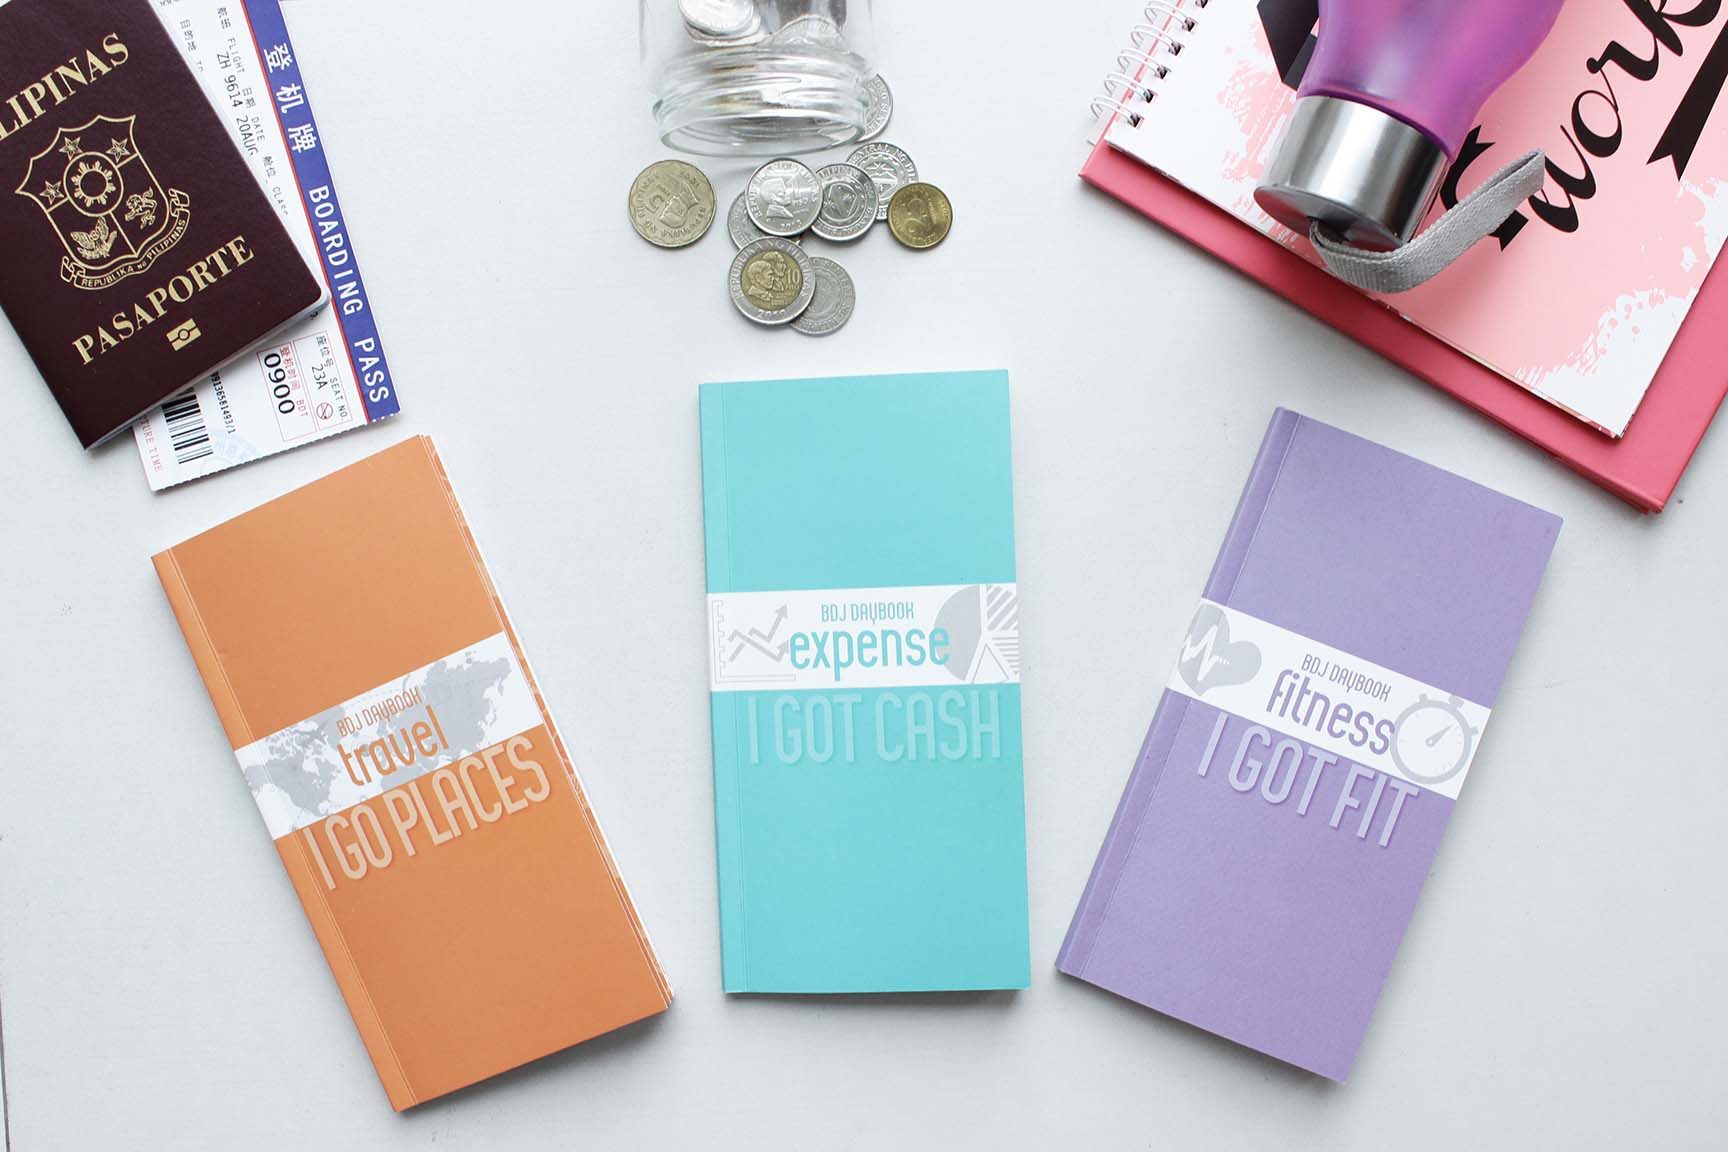 Travel Daybook, Expense Daybook, and Fitness Daybook (P250 each) 